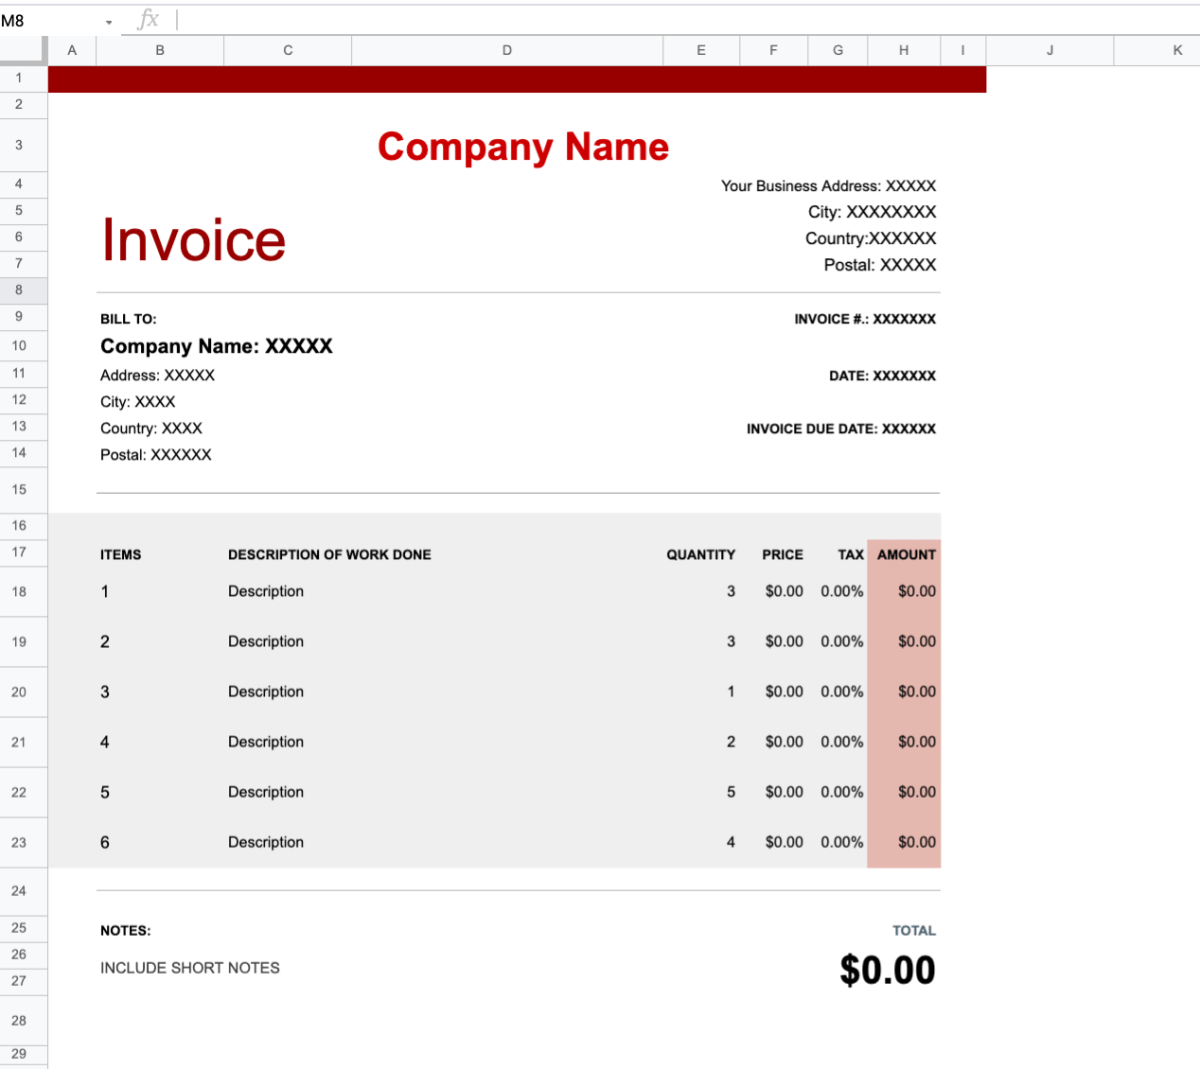 invoice-template-google-docs-ready-to-use-in-2023-coupler-io-blog